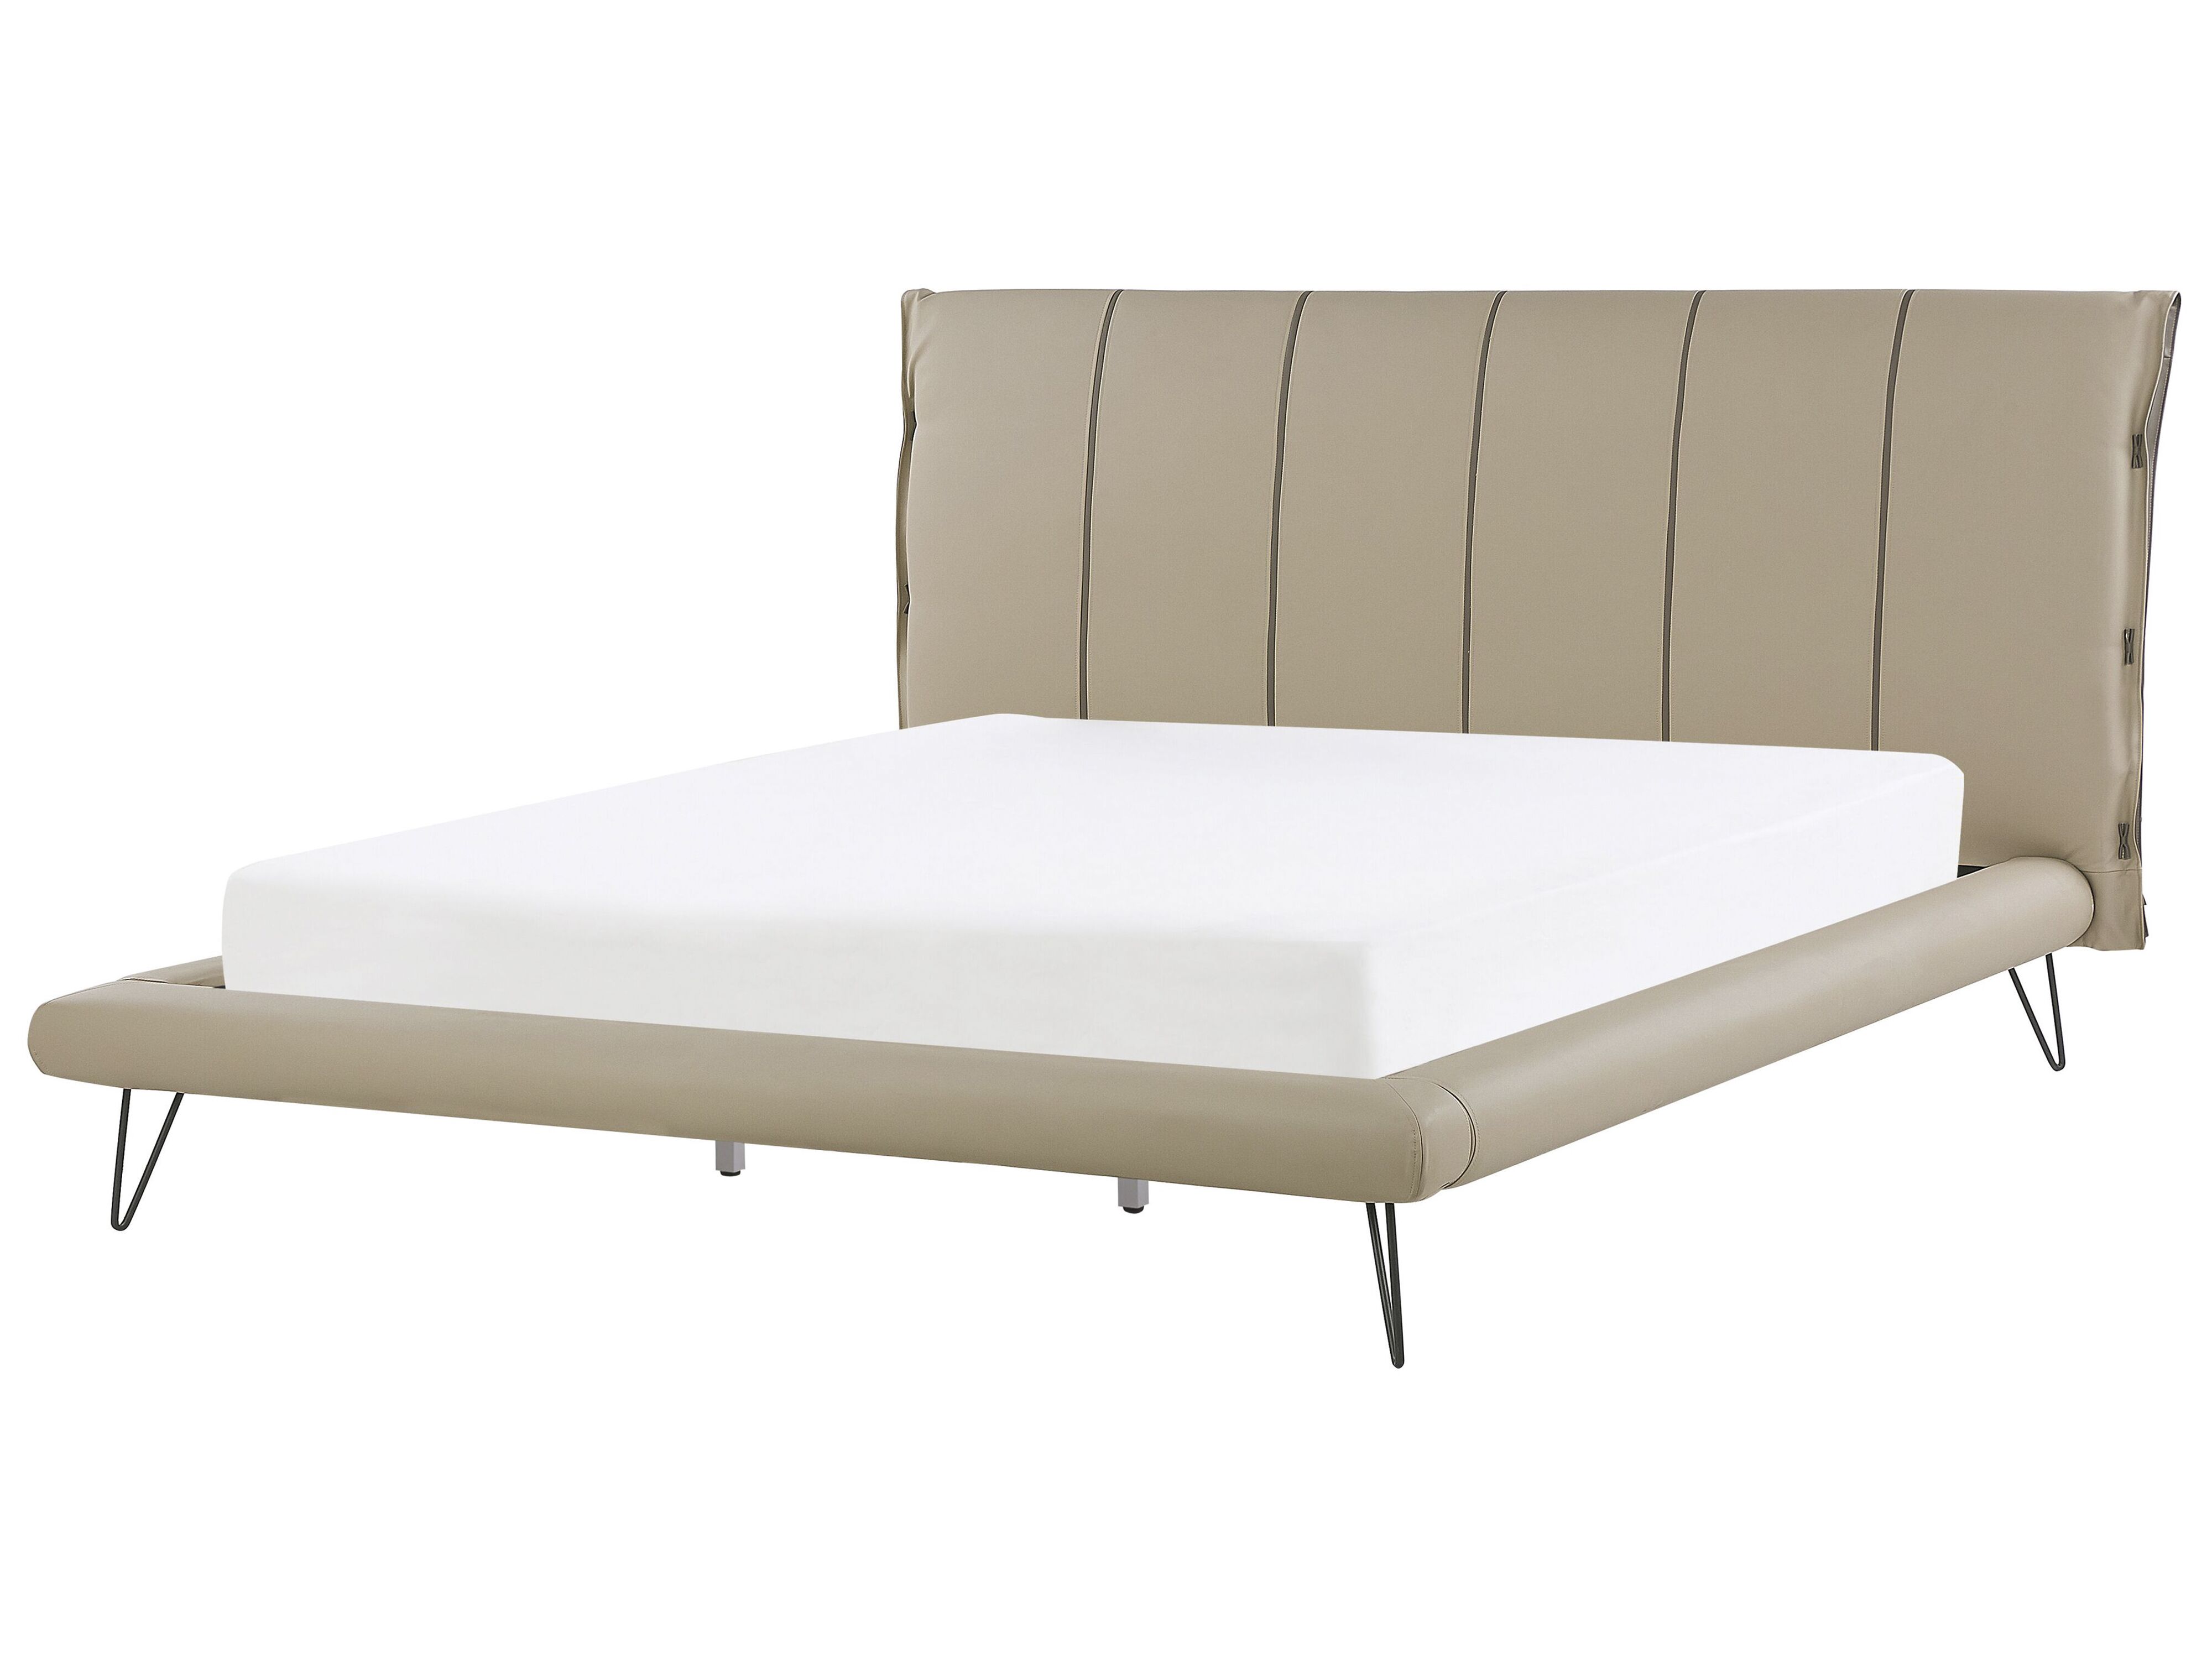 Faux Leather Eu Super King Size Bed, Handy Living Bed Frame King